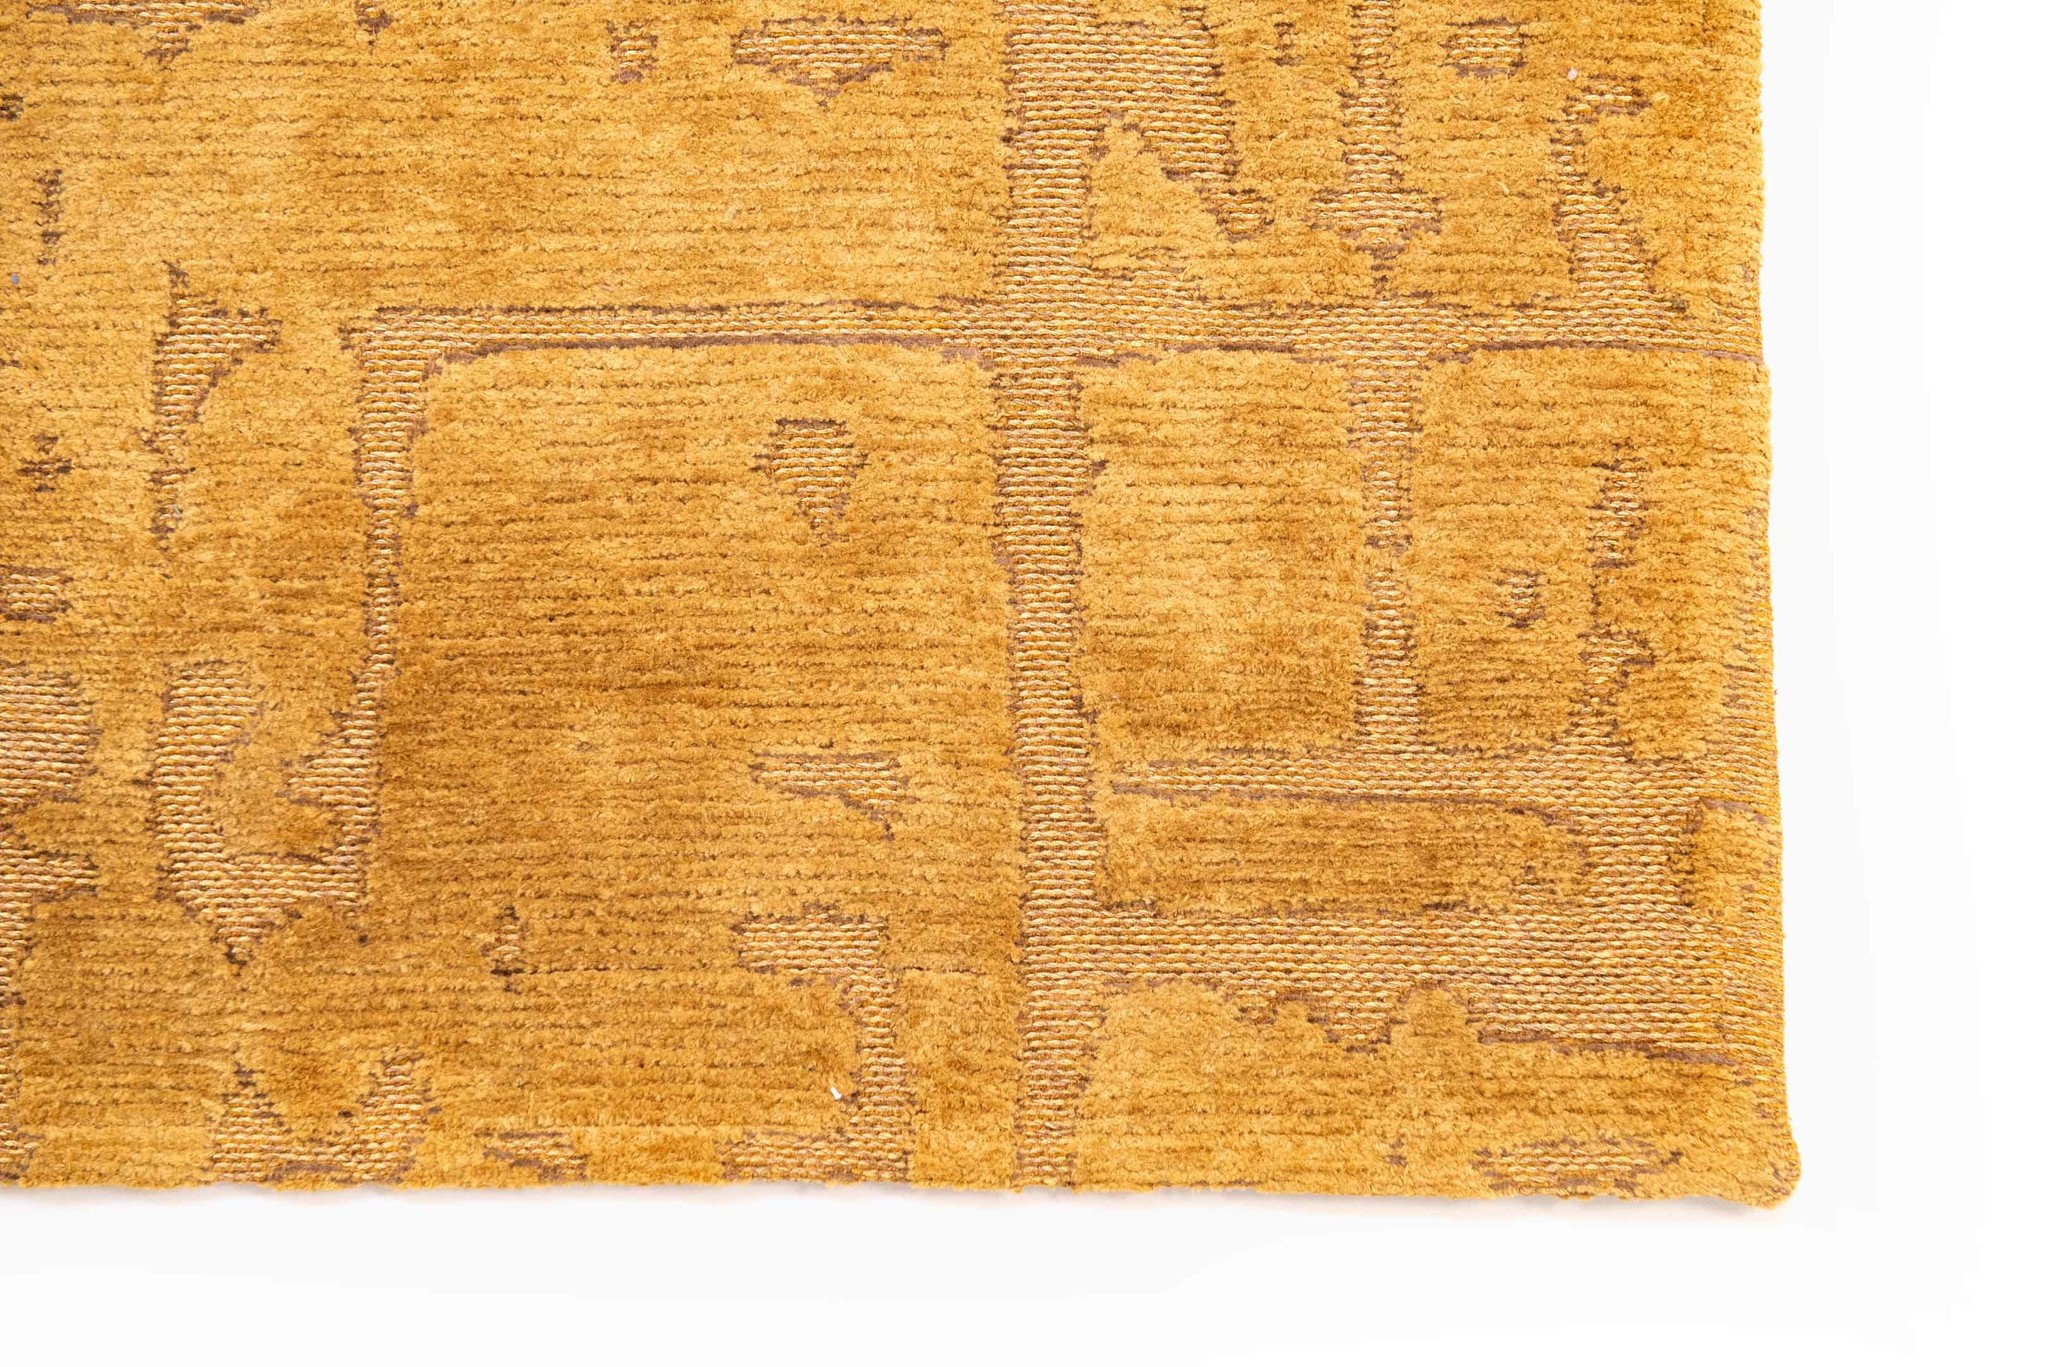 Abstract Gold Belgian Rug ☞ Size: 2' 7" x 8' 2" (80 x 250 cm)